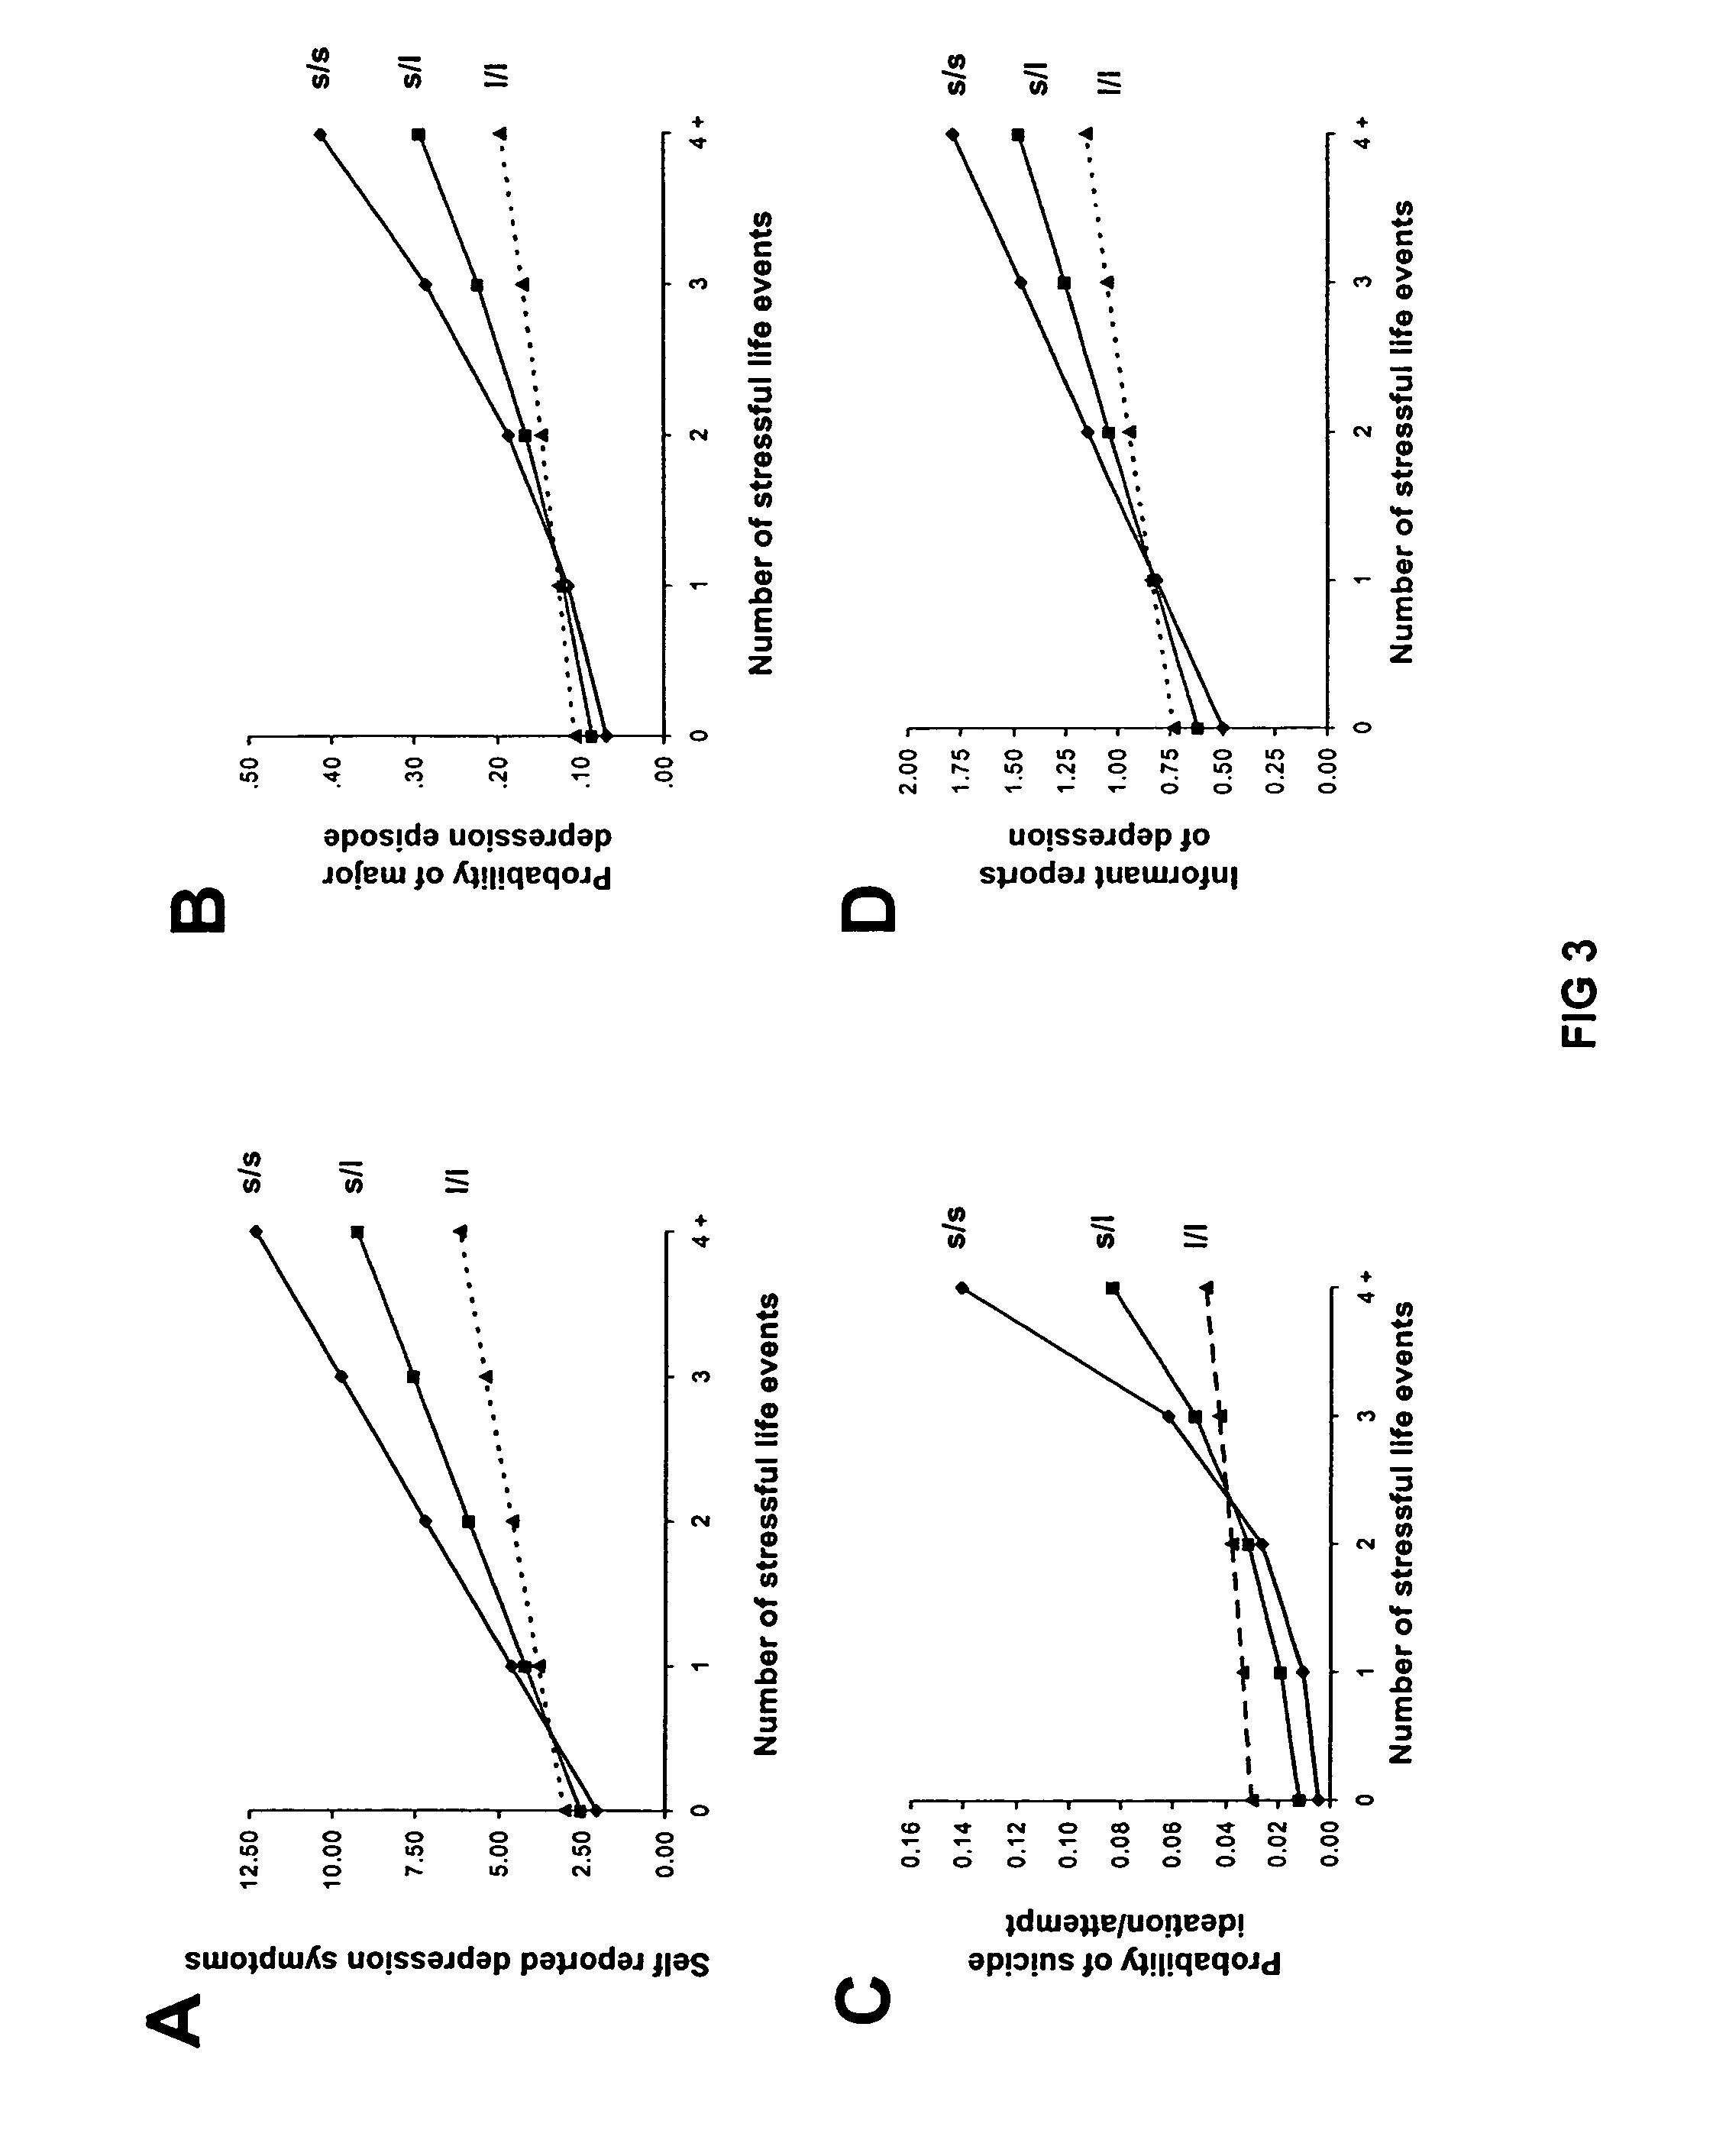 Method for assessing predisposition to depression